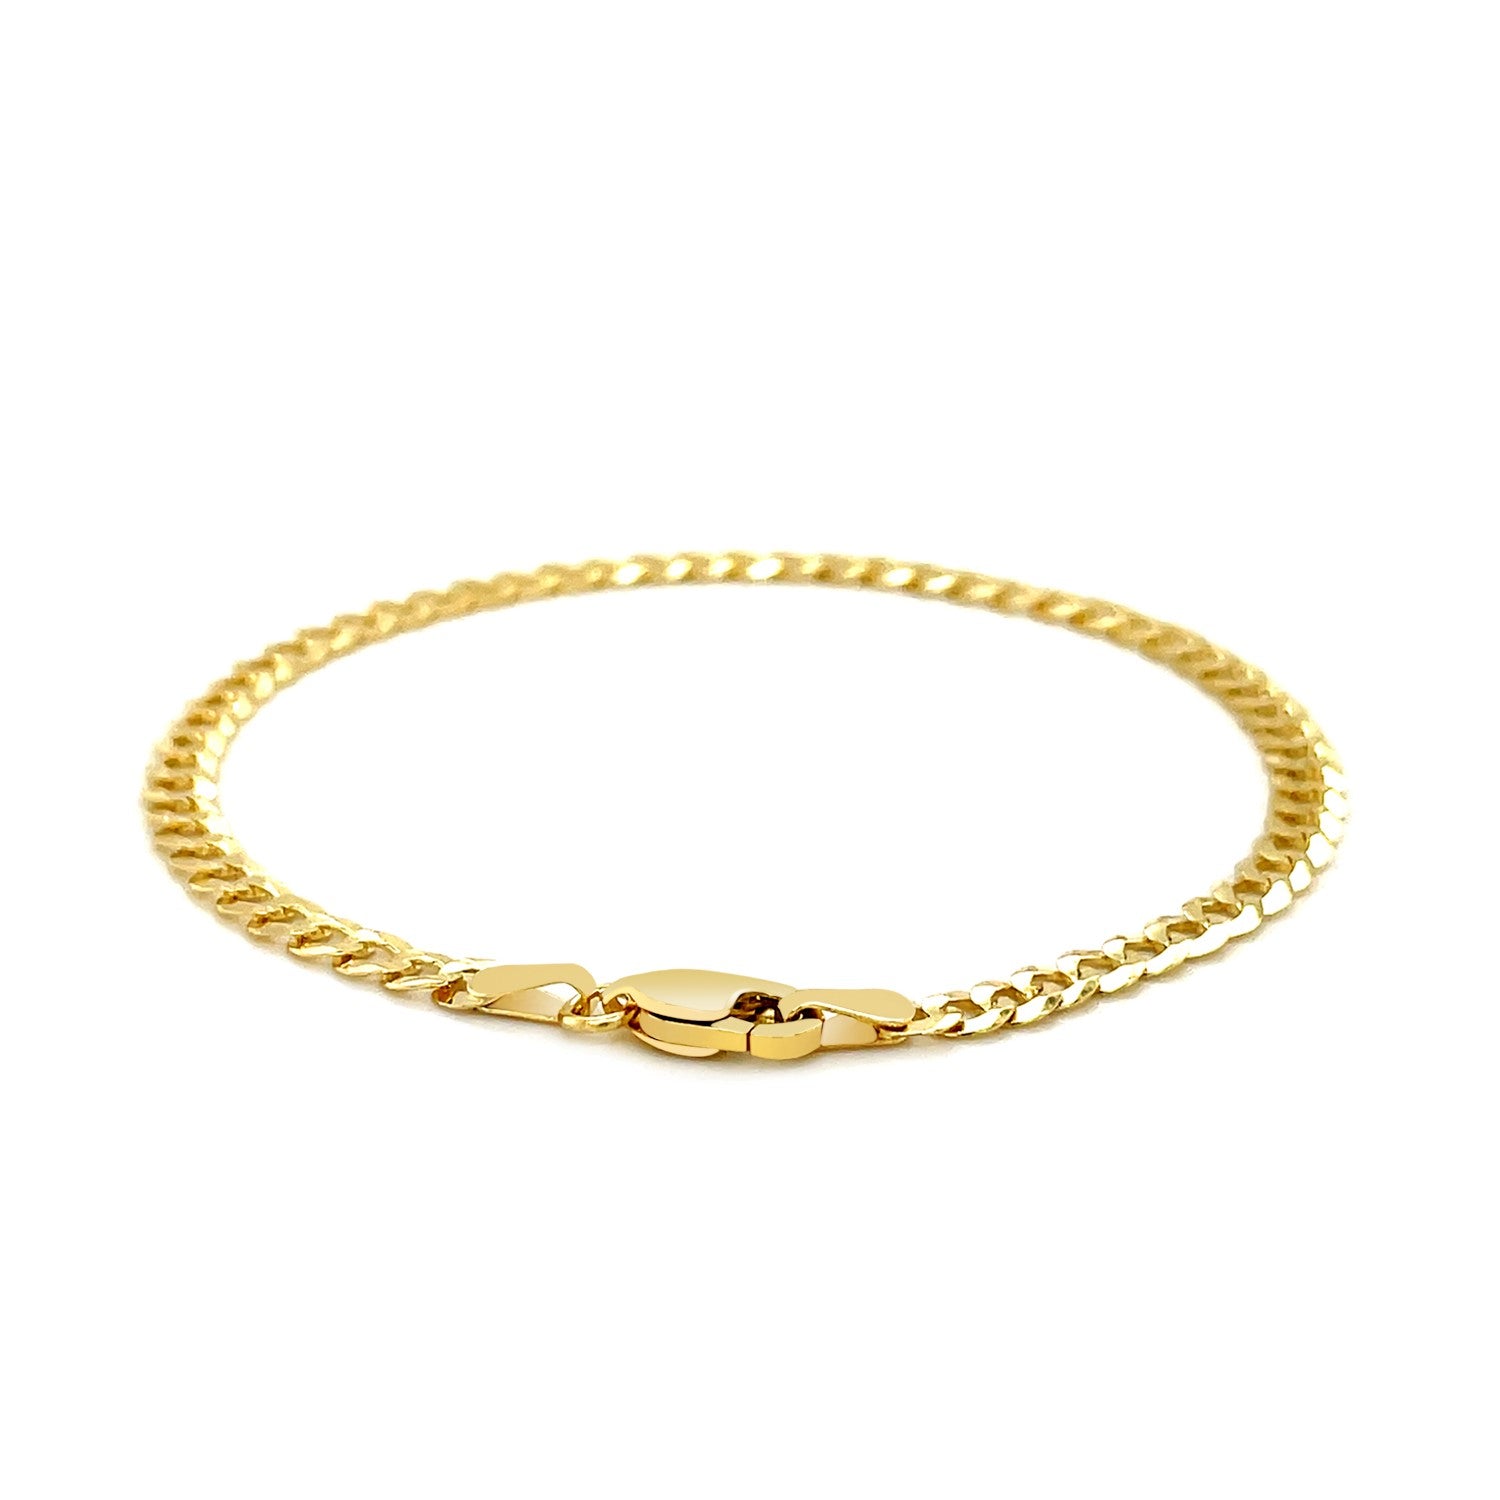 3.6mm 14k Yellow Gold Solid Curb Bracelet